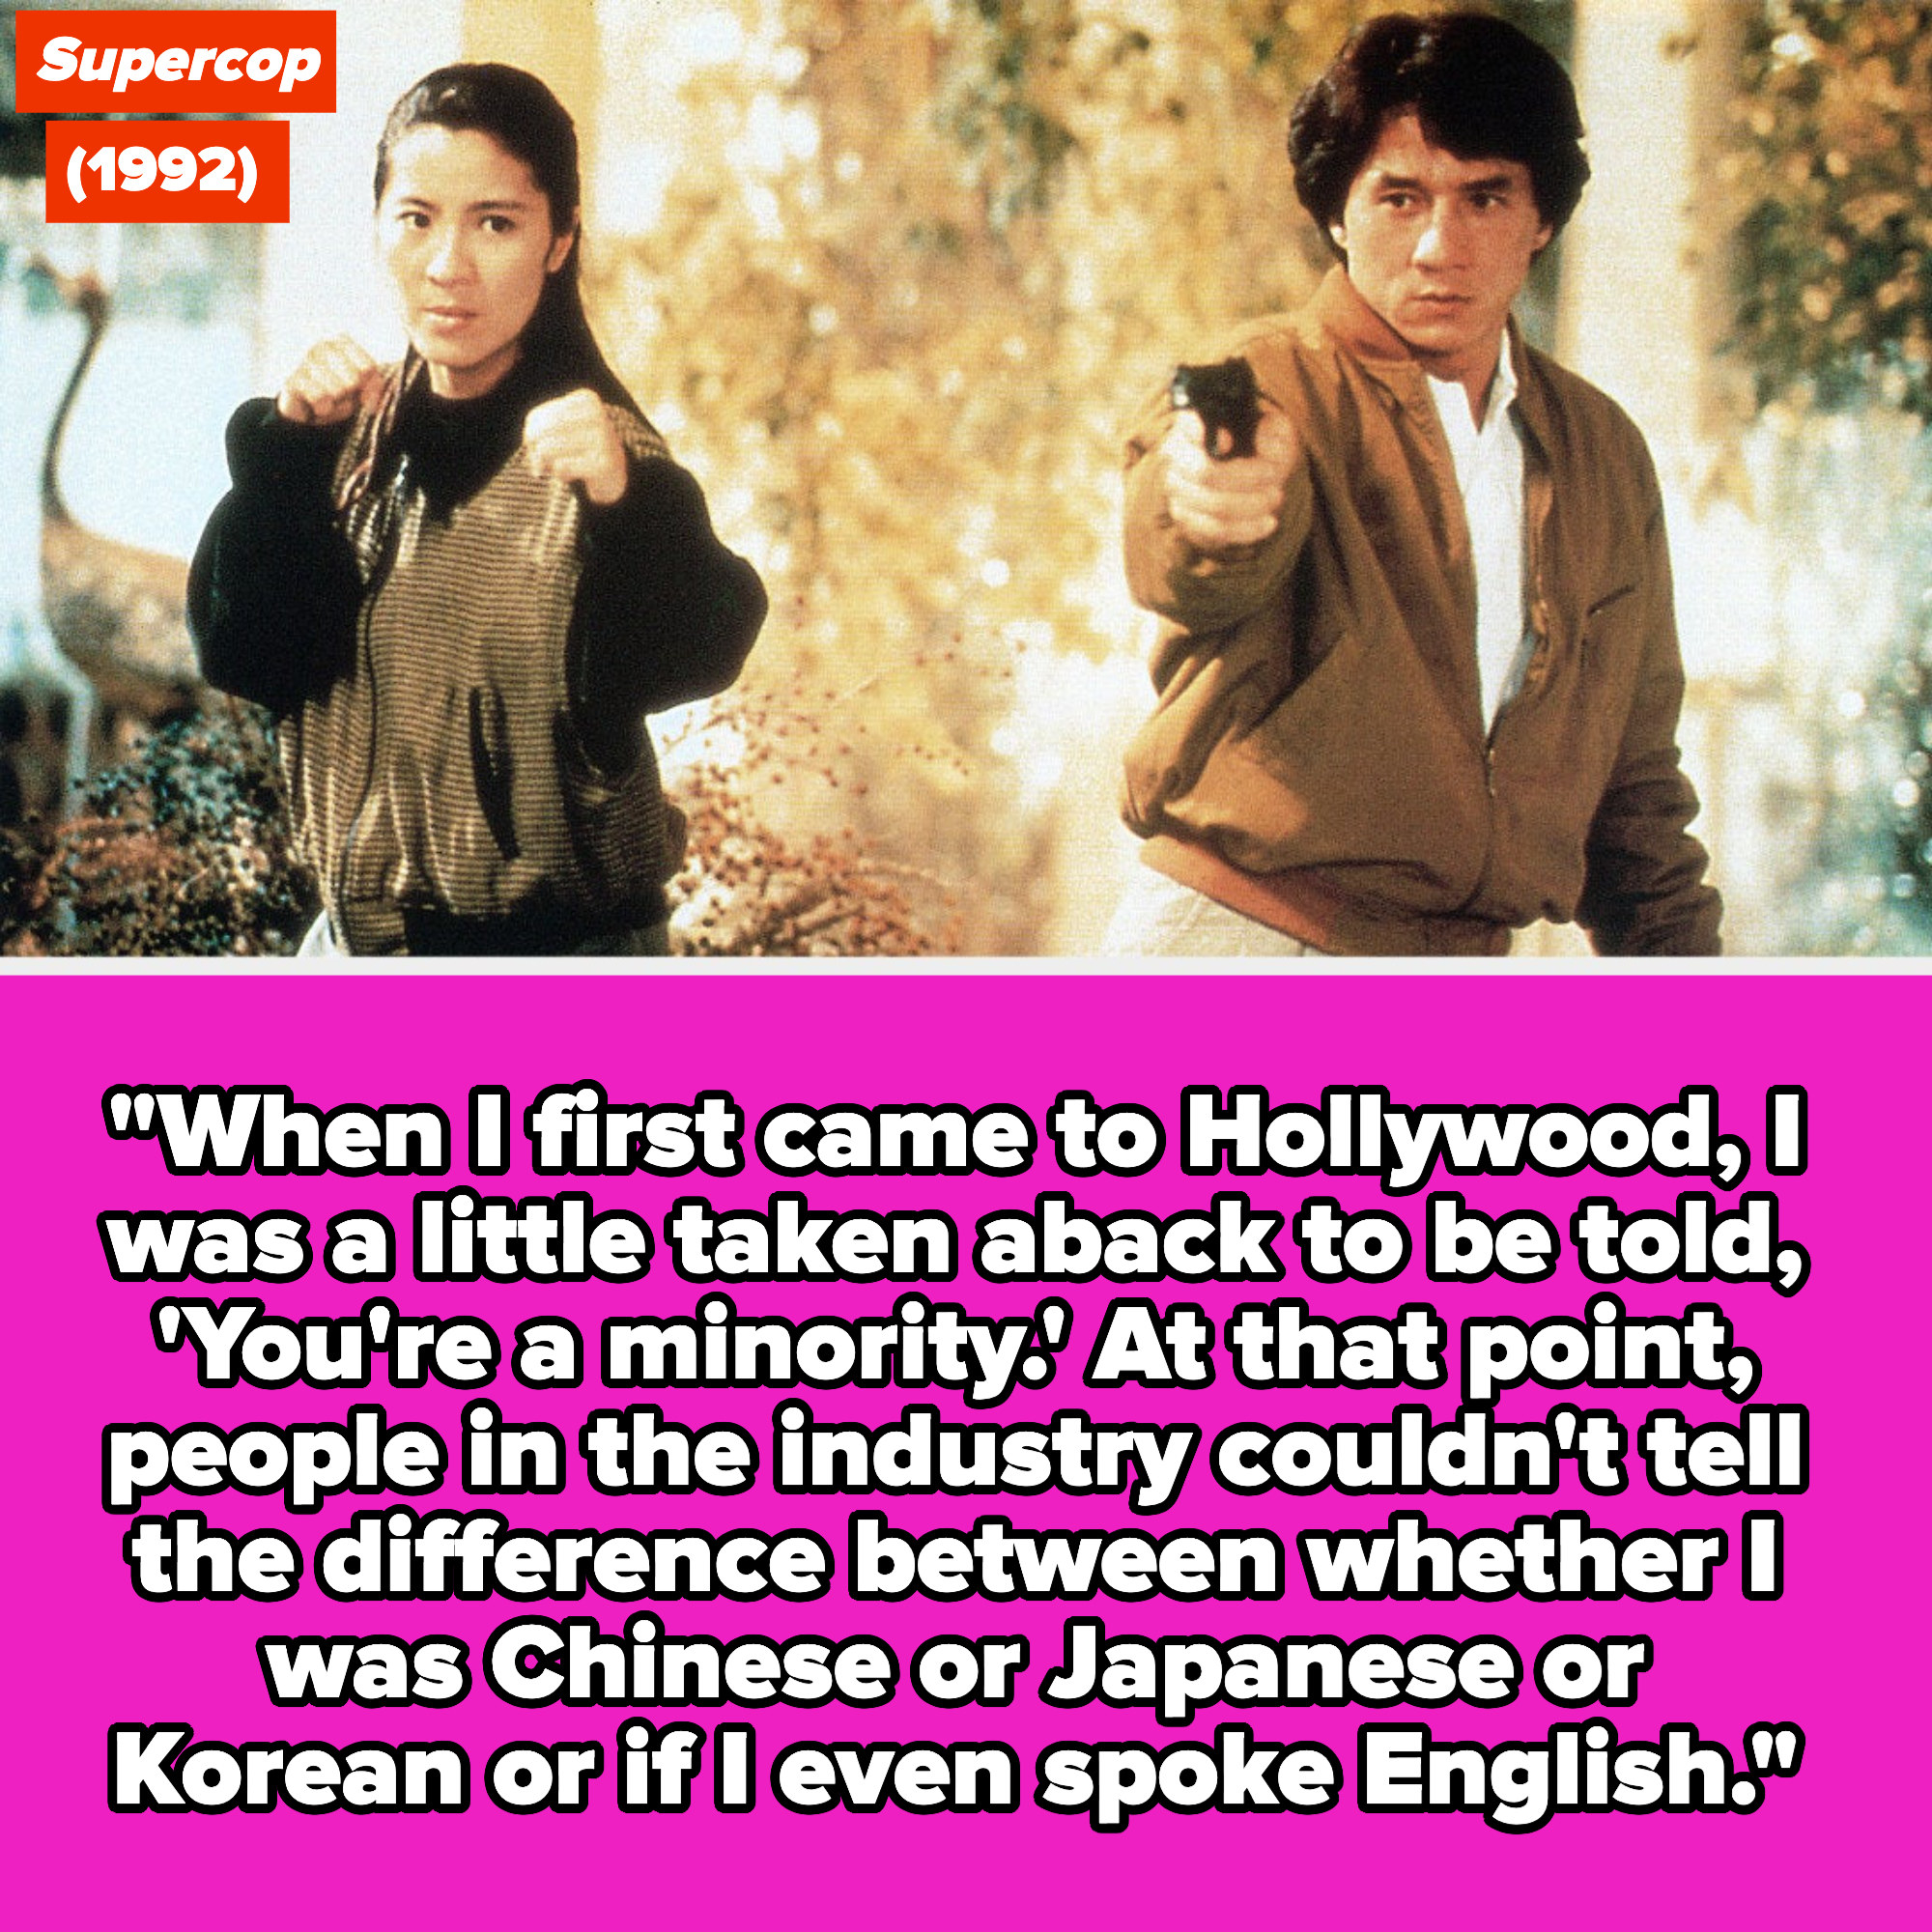 Yeoh and Jackie Chan in &quot;Supercop&quot;; quote: &quot;When I first came to Hollywood, I was a little taken aback to be told, &#x27;You&#x27;re a minority&#x27;; people in the industry couldn&#x27;t tell whether I was Chinese or Japanese or Korean or if I even spoke English&quot;